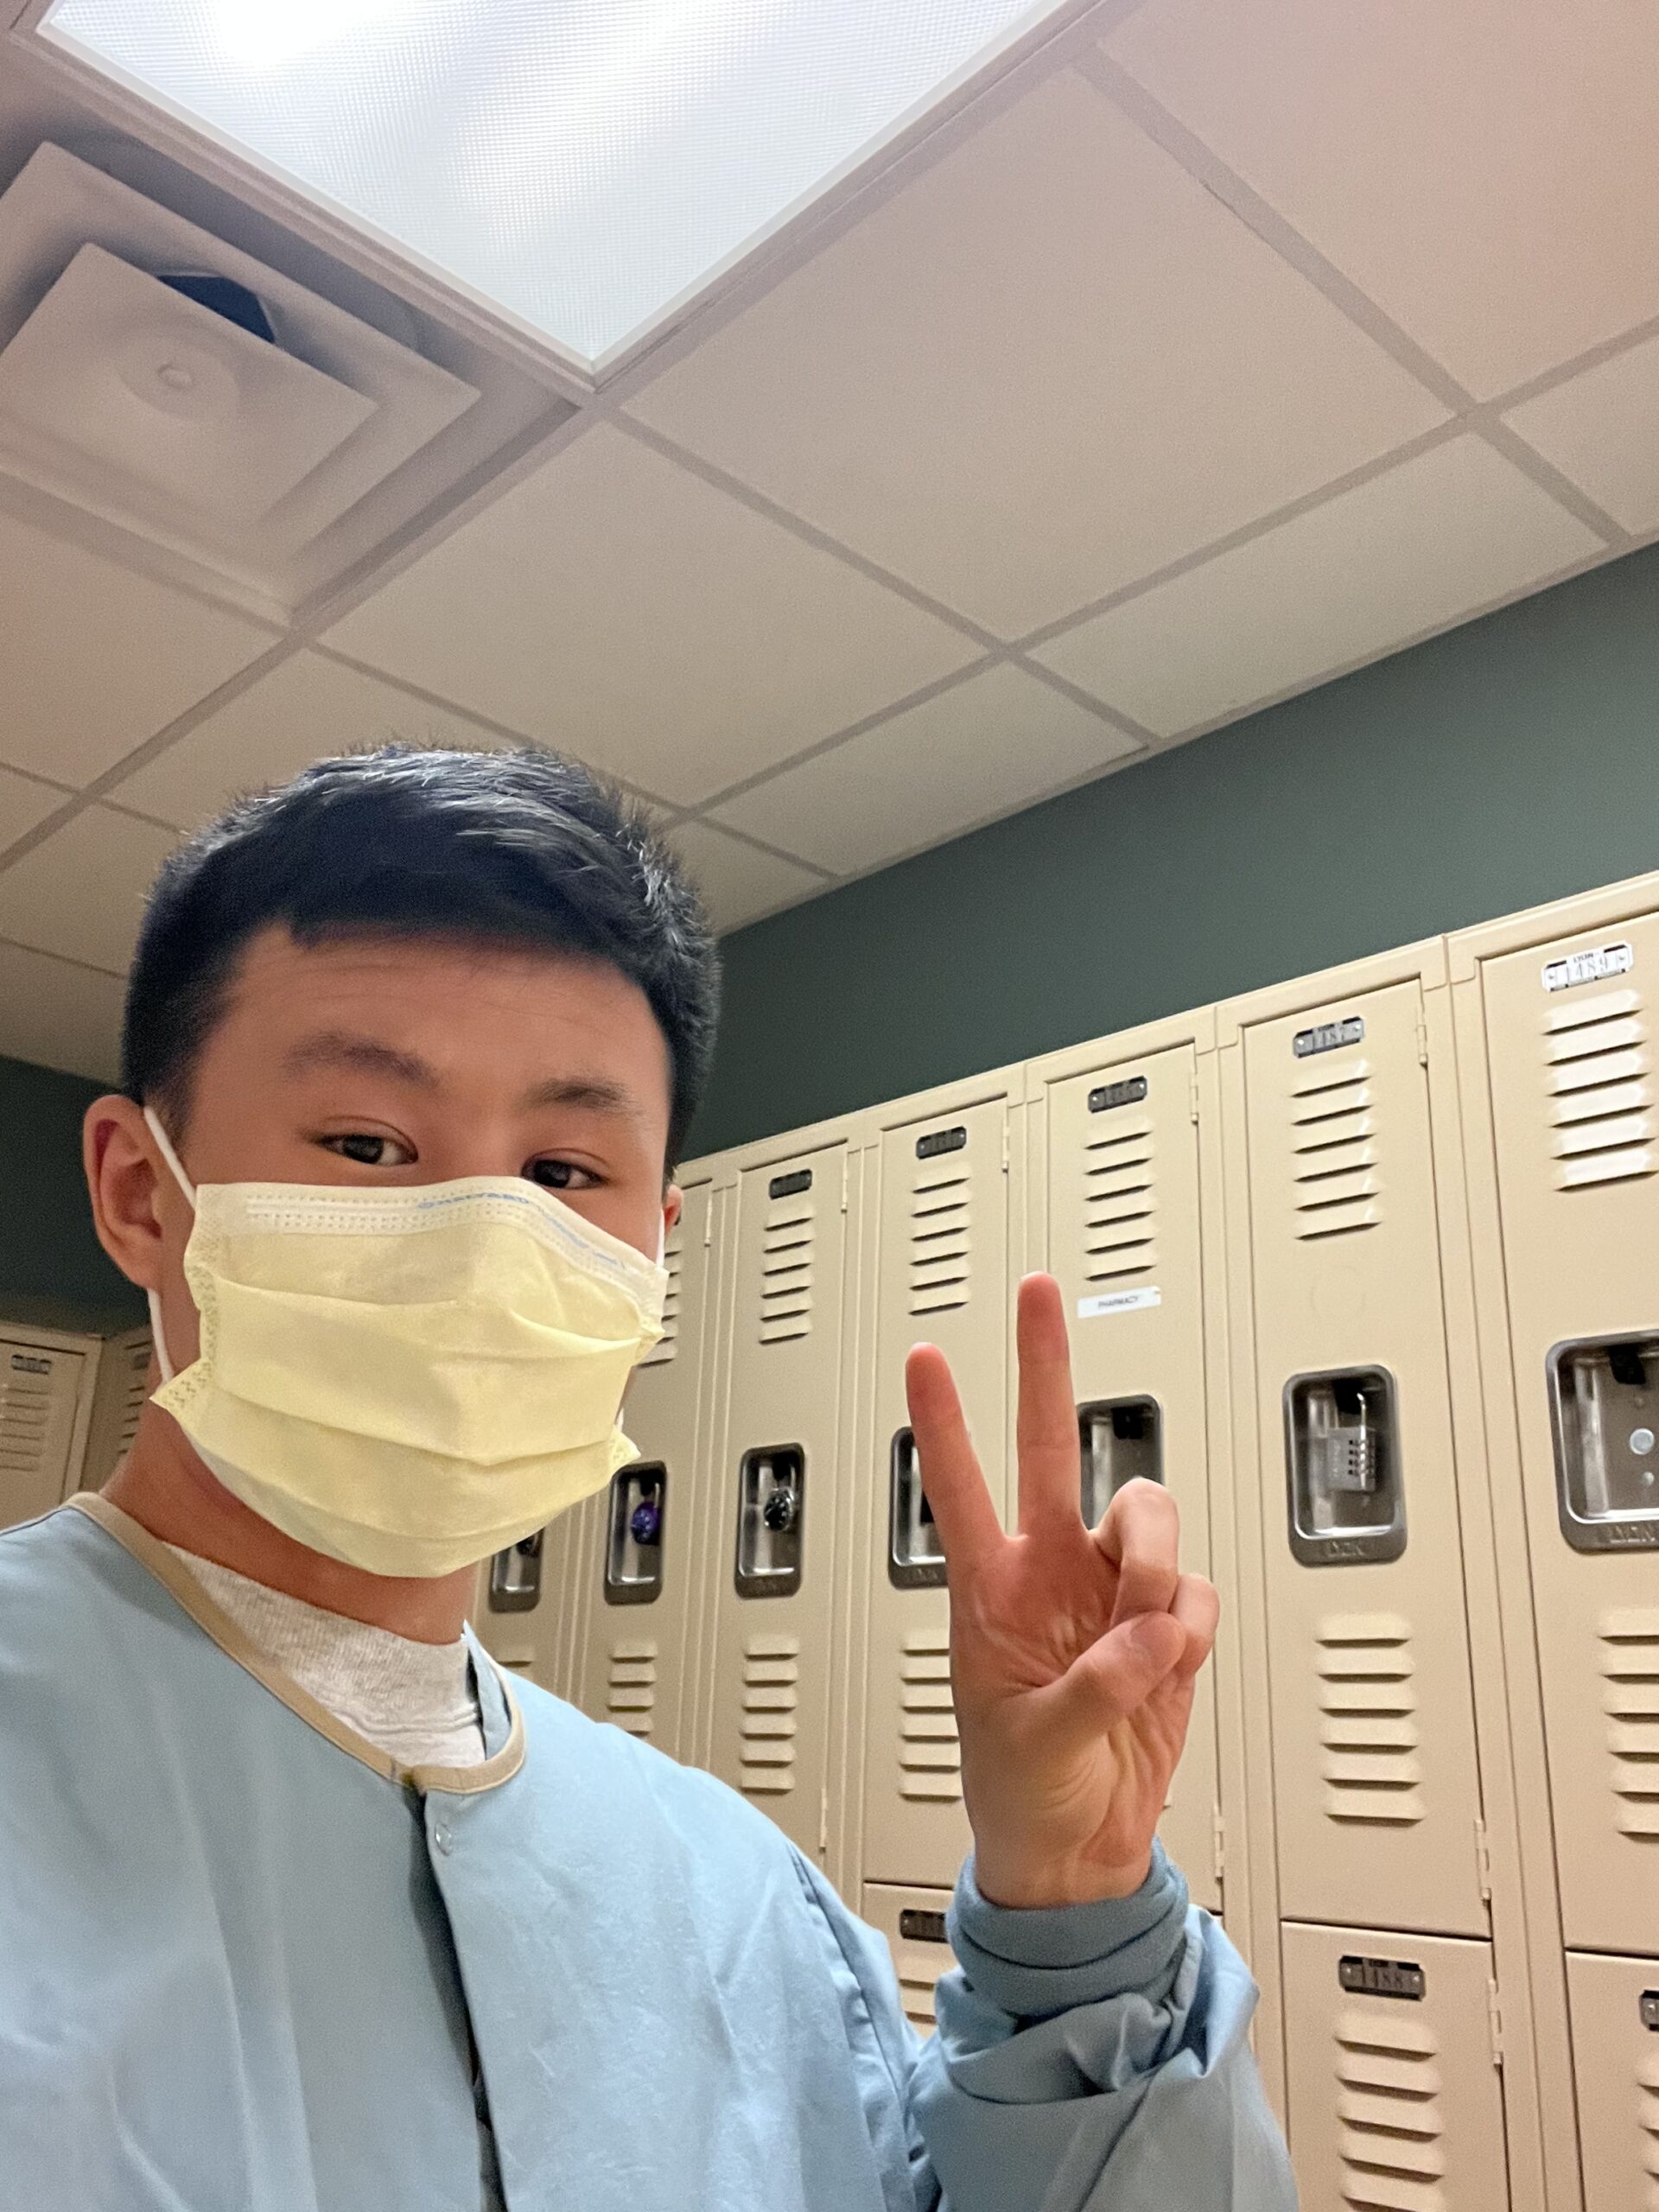 Josh holding a peace sign to the camera while wearing a paper mask and scrubs.